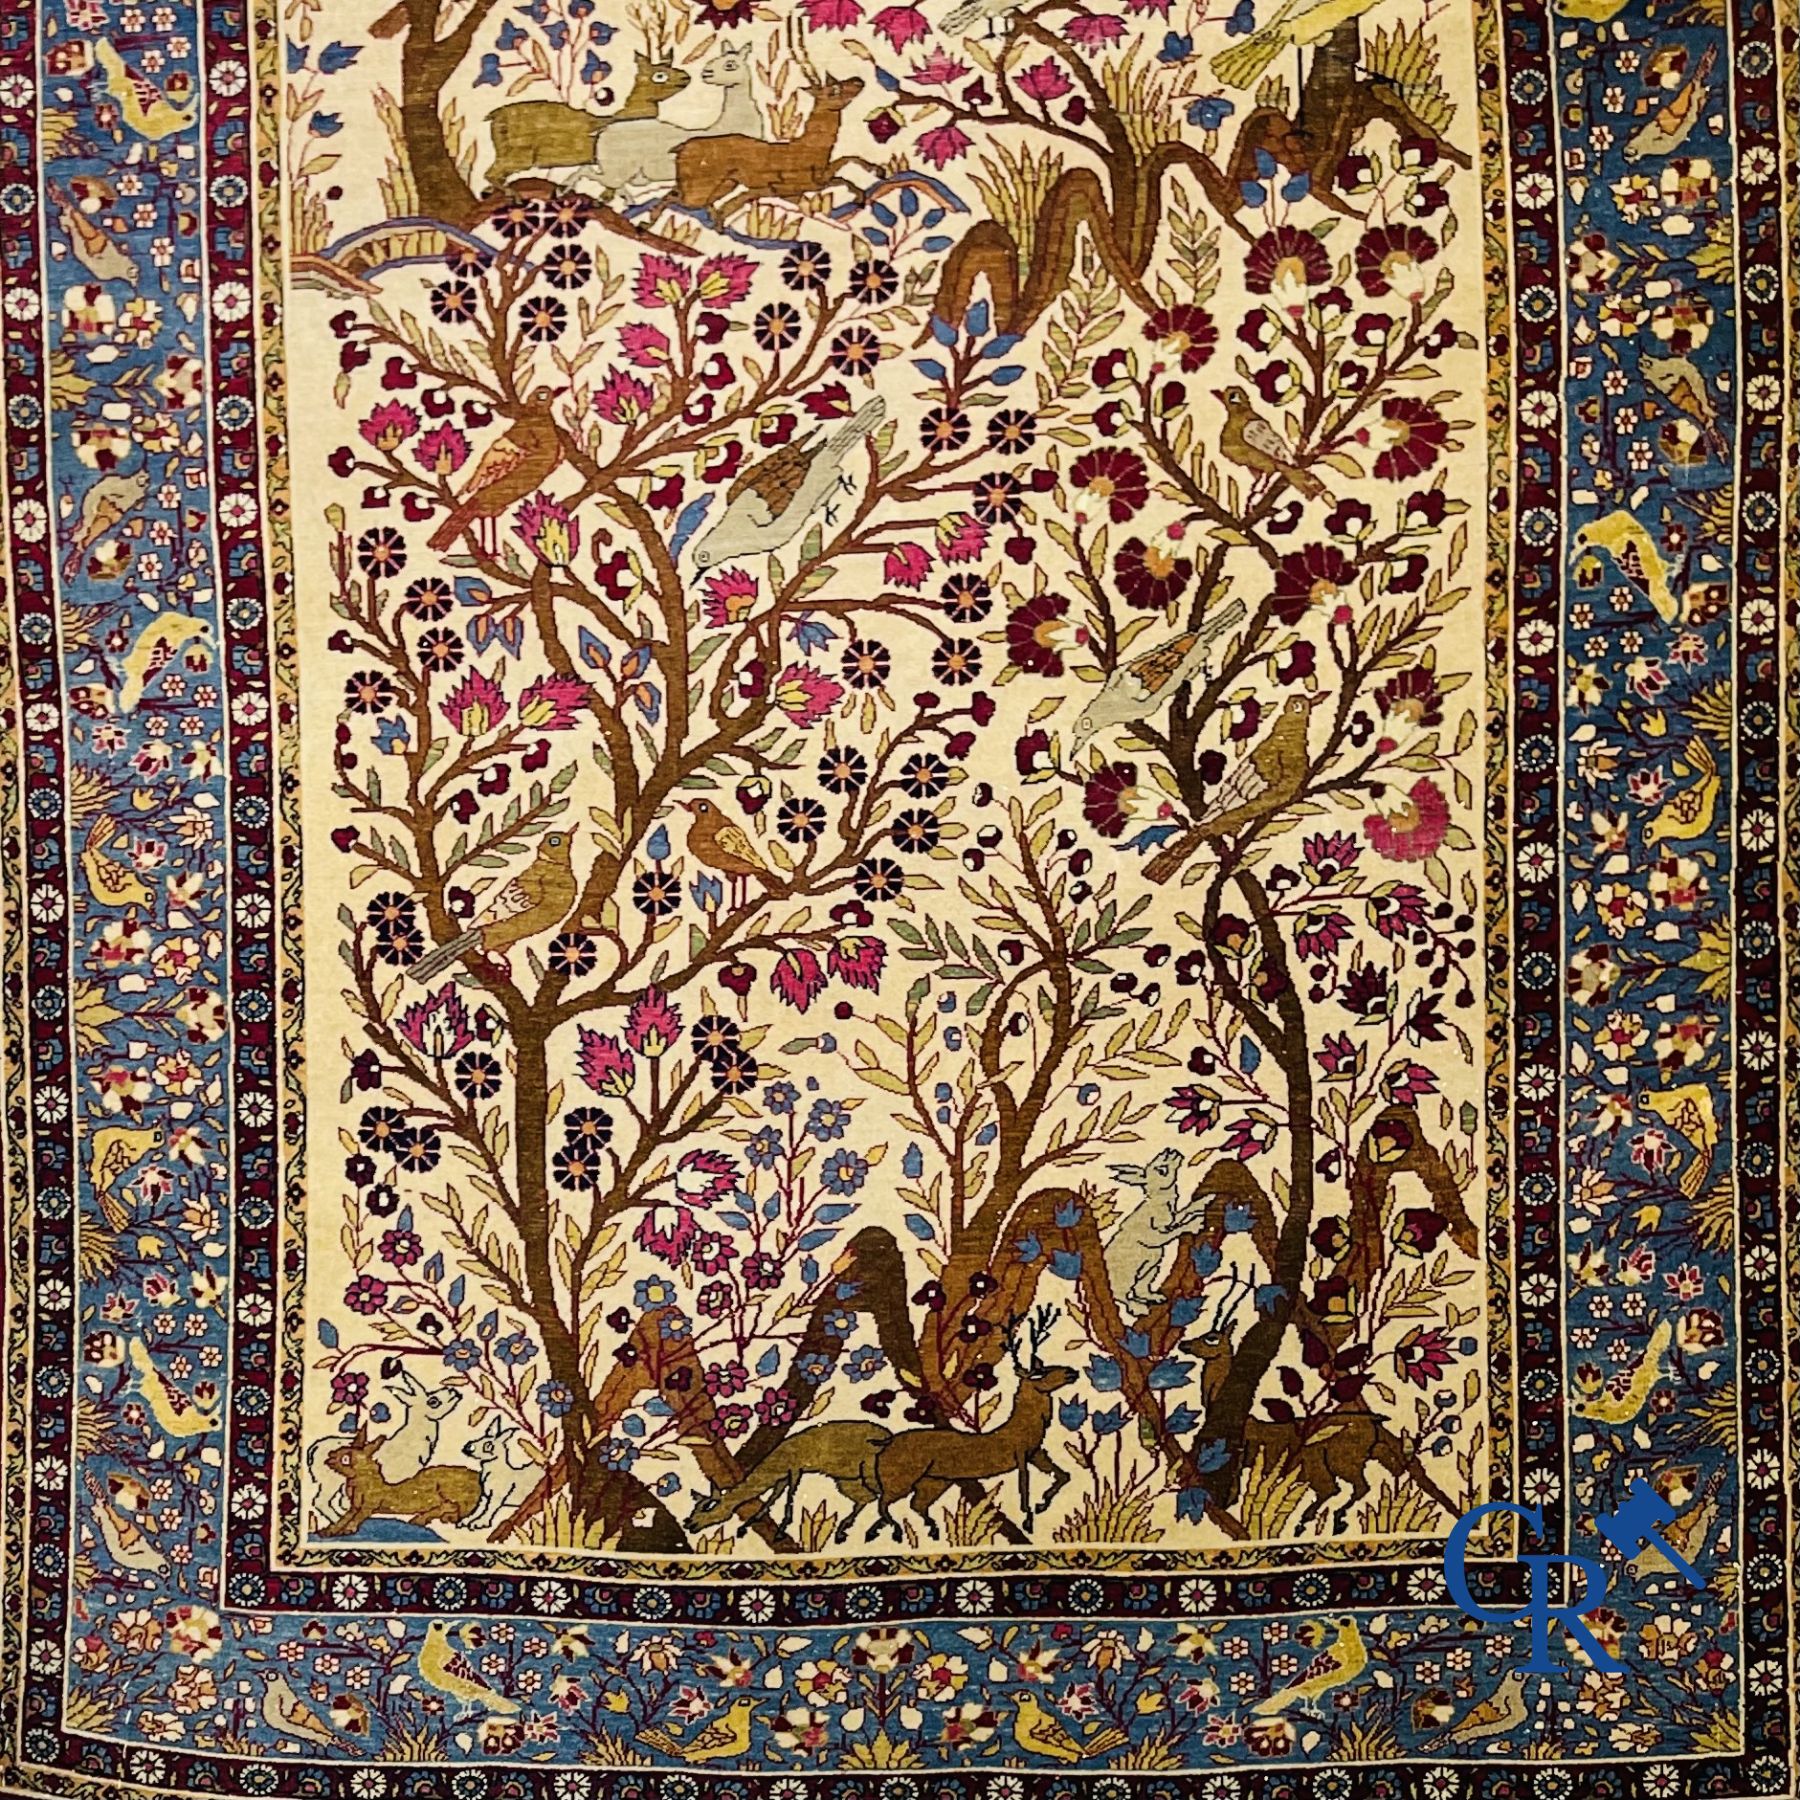 Oriental carpets: Antique oriental carpet with a decor of animals and birds in the forest. - Image 4 of 10